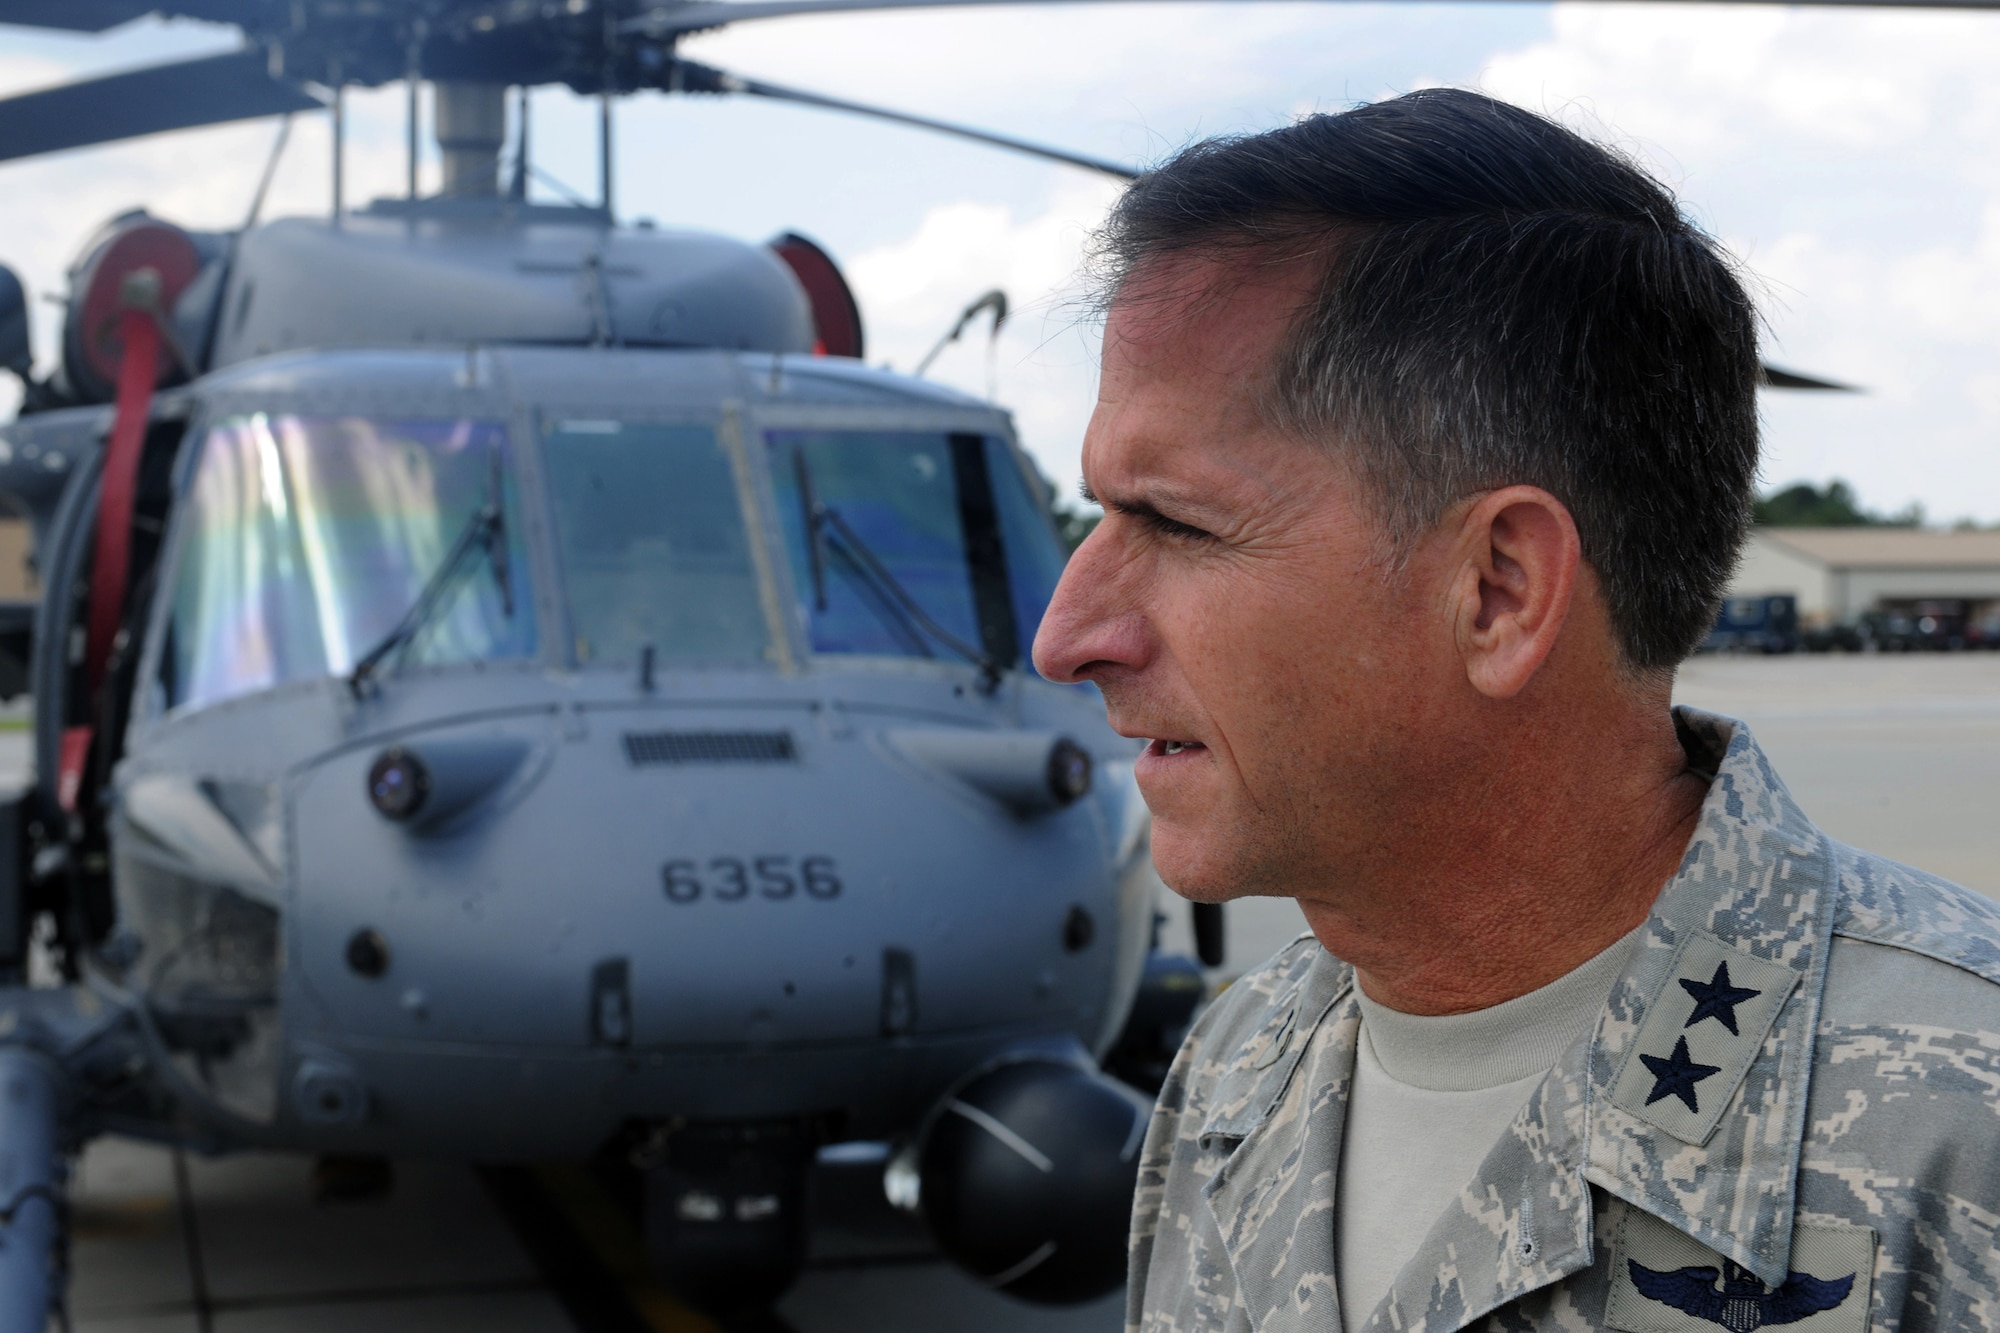 Maj. Gen. David Goldfein stands in front of an HH-60G Pave Hawk during his visit to Moody Air Force Base, Ga., Sept. 1, 2010. During his recent visit, General Goldfein was able to reunite with Lt. Col. Tom Kunkel, the HH-60G pilot who rescued him when his aircraft was shot down over Serbia. General Goldfein is the Air Combat Command director of air and space operations. Colonel Kunkel is the 41st Rescue Squadron commander. (U.S. Air Force photo/Airman 1st Class Benjamin Wiseman)
